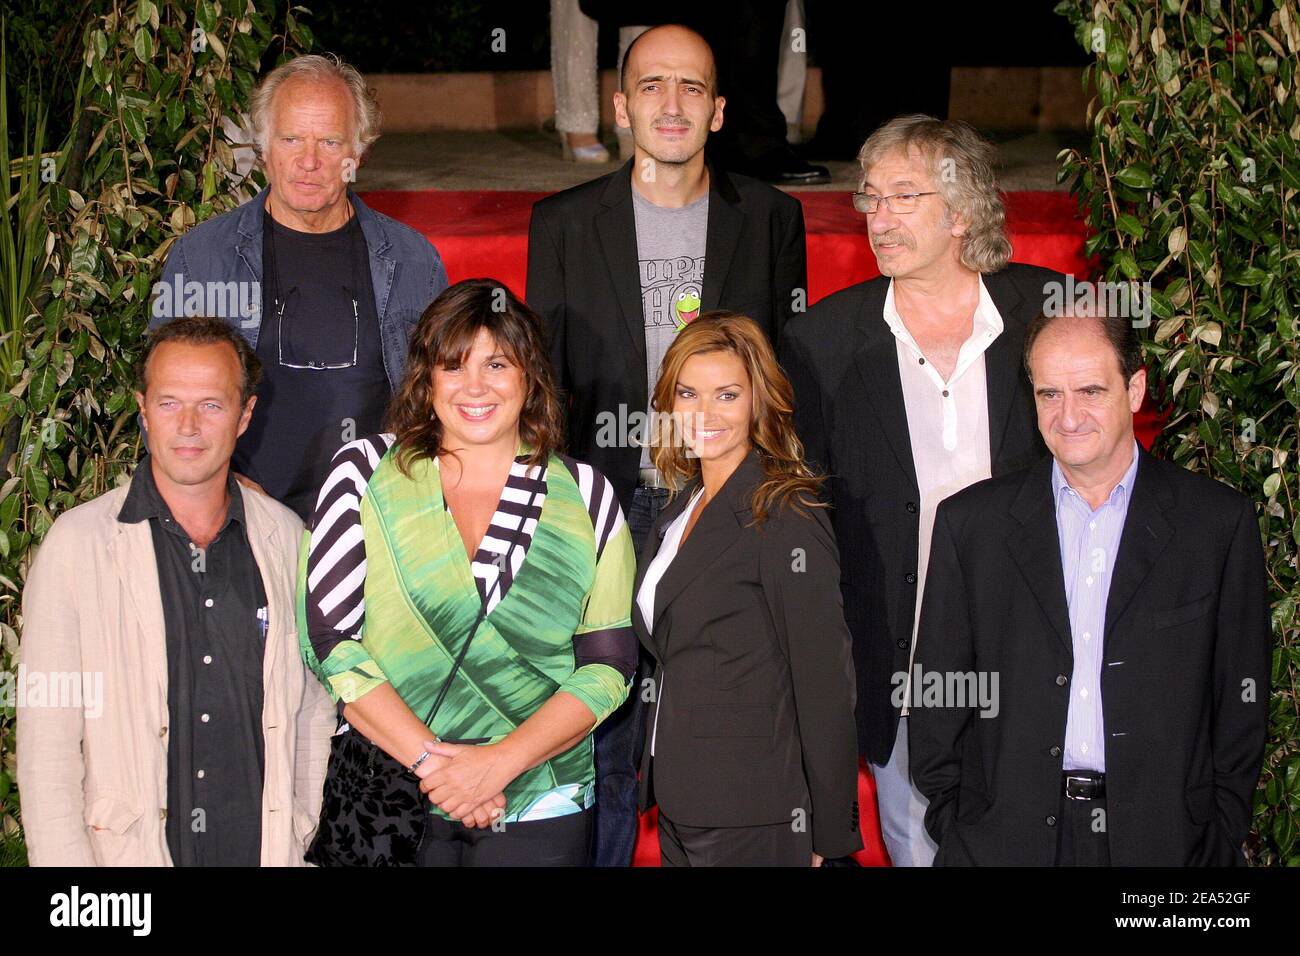 Jury members (back l to r) Peter Kassovitz, Eric Neveux, Gerard Carre, (front l to r) Laurent Malet, Michele Bernier, Ingrid Chauvin and Pierre Lescure attend the 7th TV fiction Festival opening ceremony in Saint-Tropez, France, on September 15, 2005. Photo by Gerald Holubowicz/ABACAPRESS.COM Stock Photo